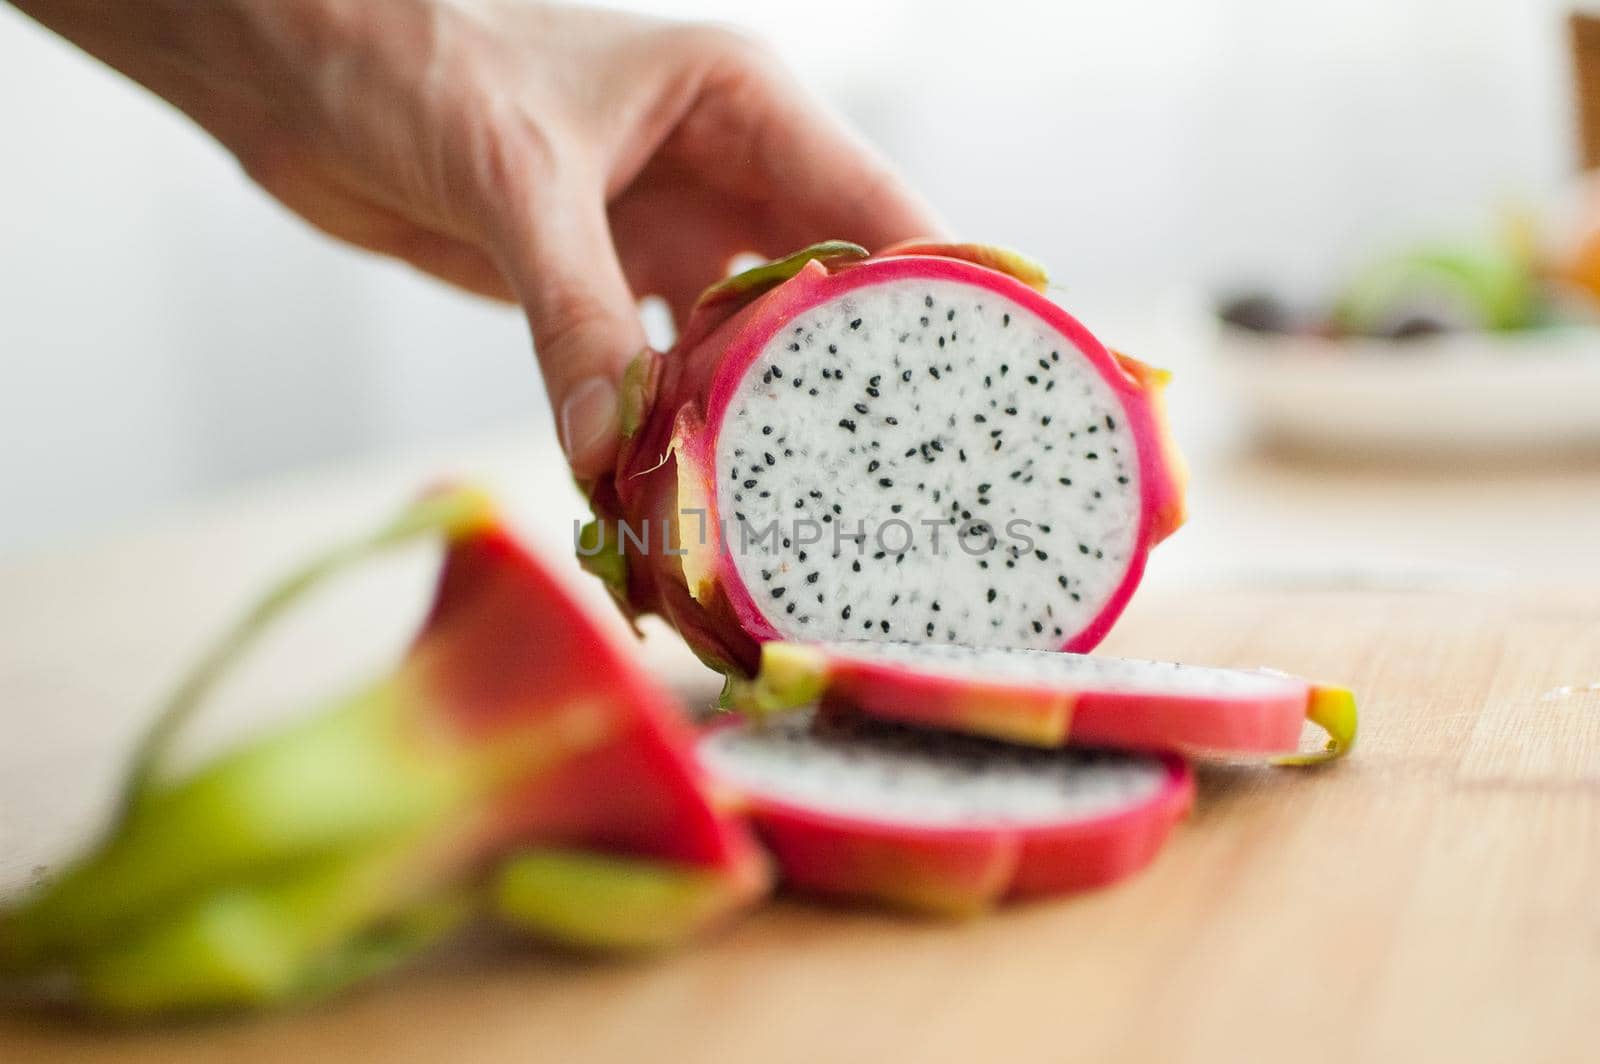 Female hands is cutting a dragon fruit or pitaya with pink skin and white pulp with black seeds on wooden cut board on the table. Exotic fruits, healthy eating concept by balinska_lv